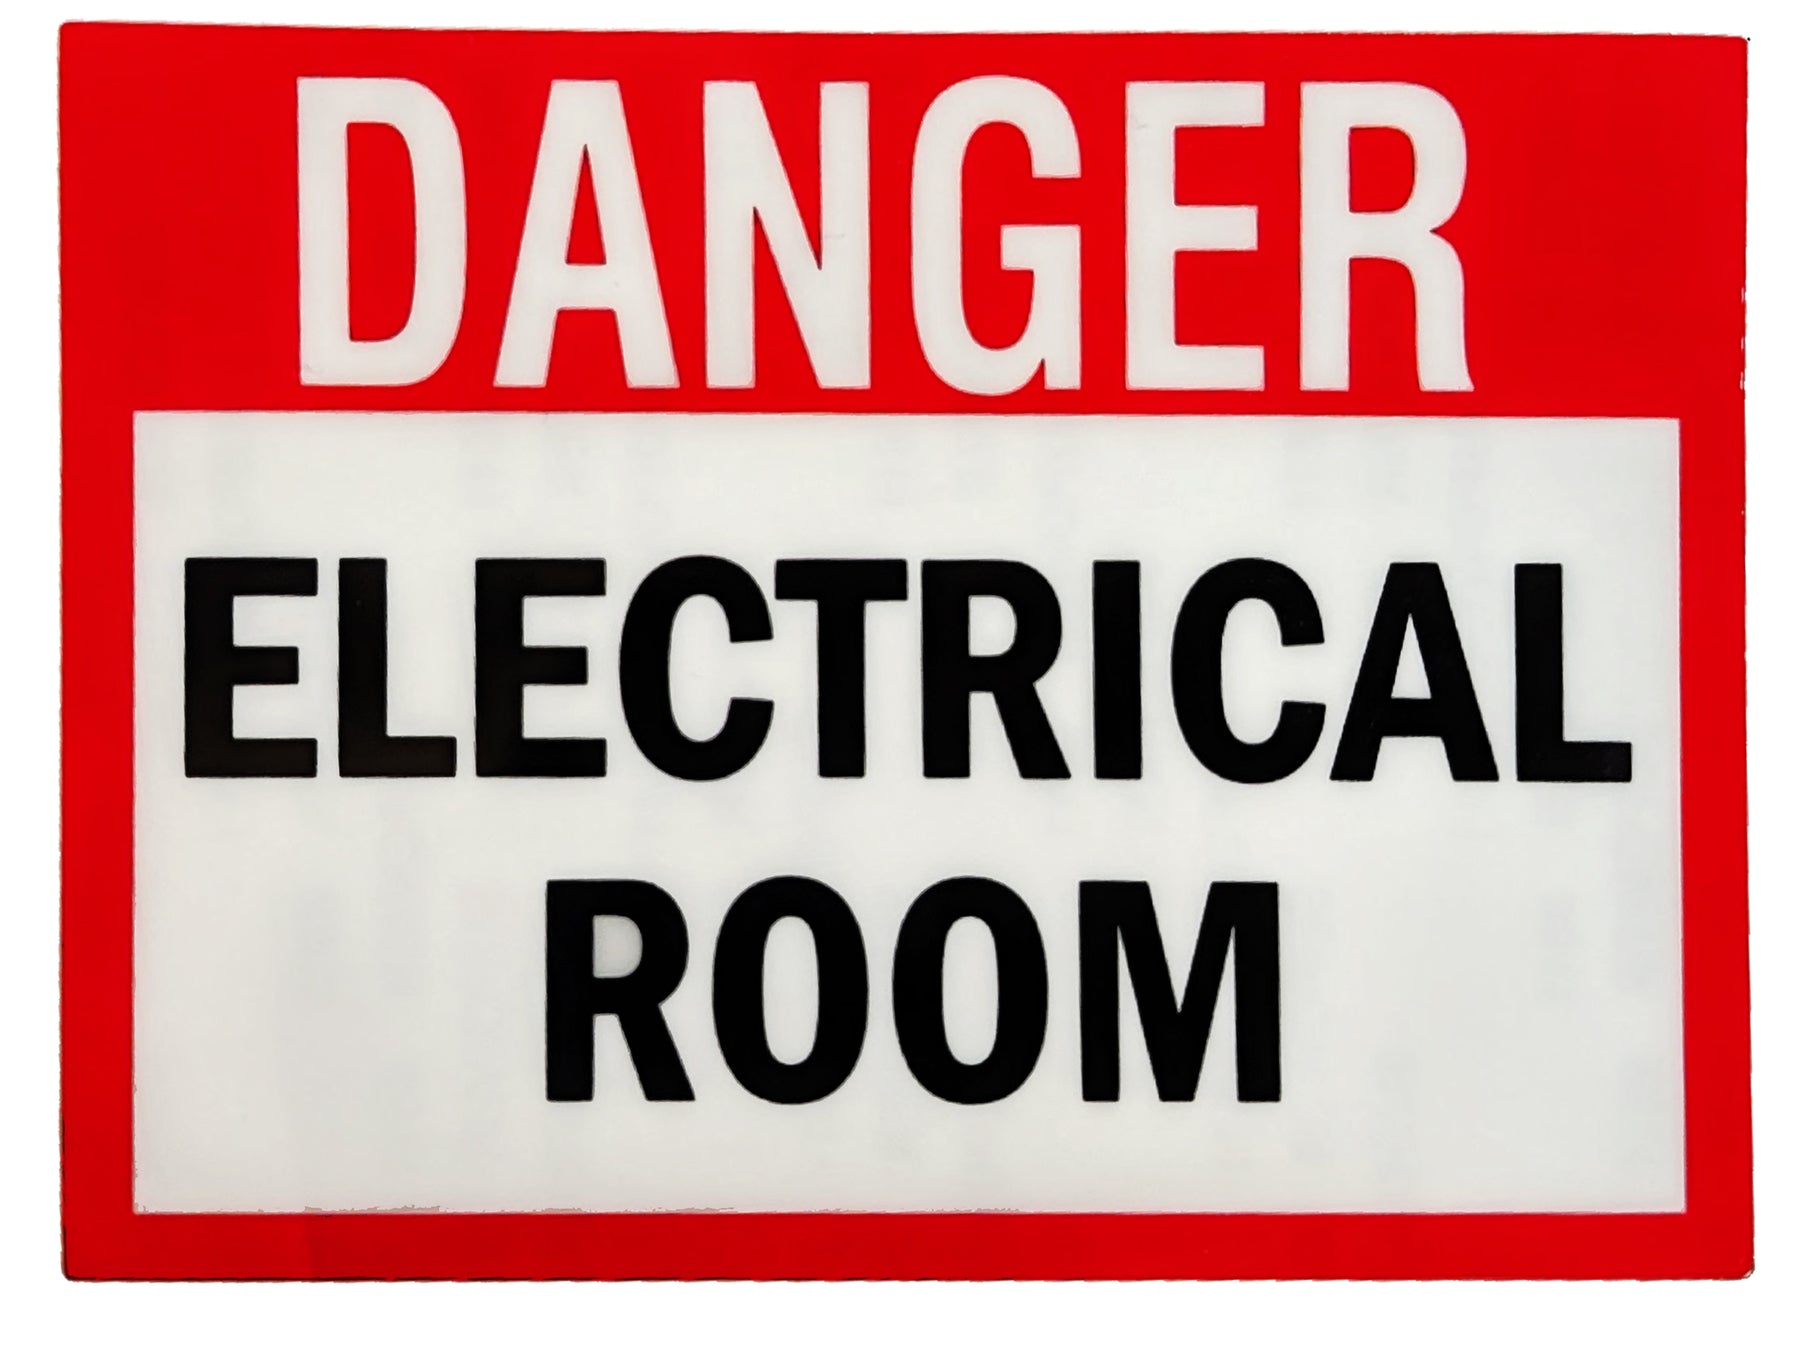 Danger Electrical Room Sign | Warning | Vinyl Sticker | Easy to Install | Durable and Self-Adhesive | Pack of 2 | Size 4" x 3"